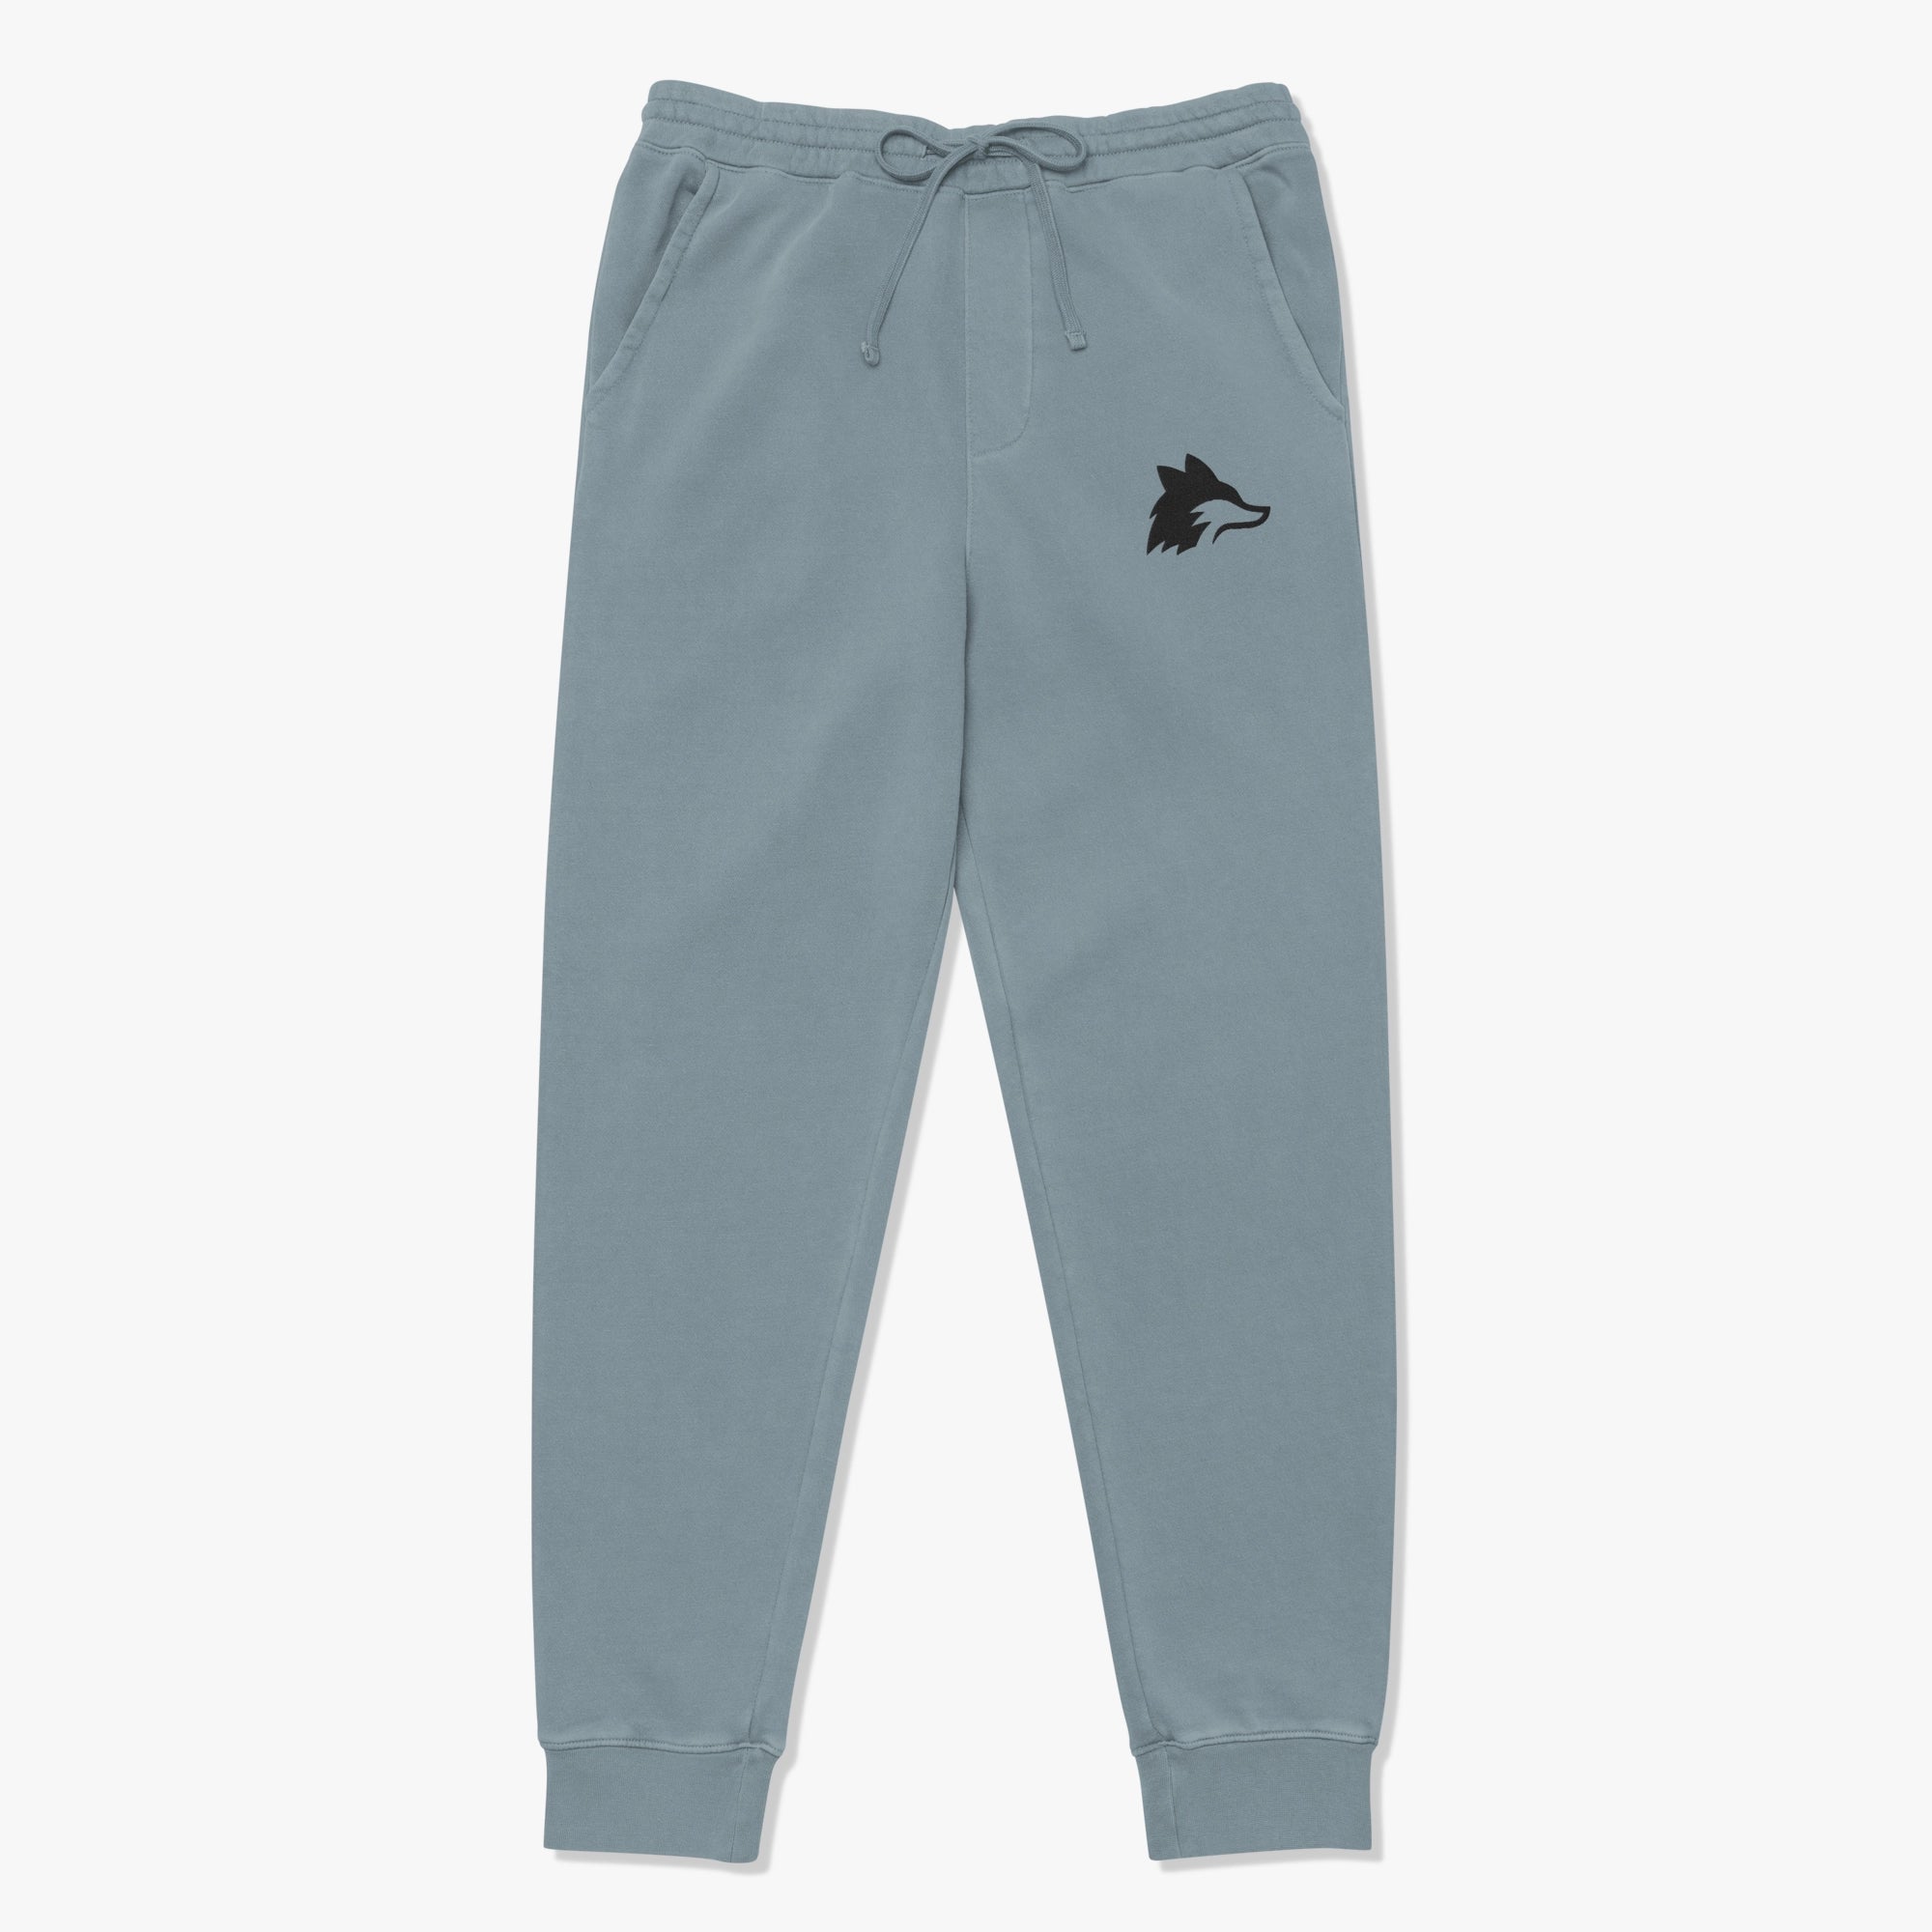 Elevate your comfort and style with the Stock 24 Sweatpants by Repulse Gaming. Crafted from 80% cotton and 20% polyester, featuring a 100% cotton shell, these sweatpants boast an embroidered design on the front. Enjoy a relaxed fit with sewn eyelets, a sewn fly, and an elastic waistband with shoe-string drawcords for a customizable fit. The preshrunk fabric ensures a perfect fit, and the sewn-on back pocket adds a practical touch. Stay cozy and on-trend with these versatile sweatpants.